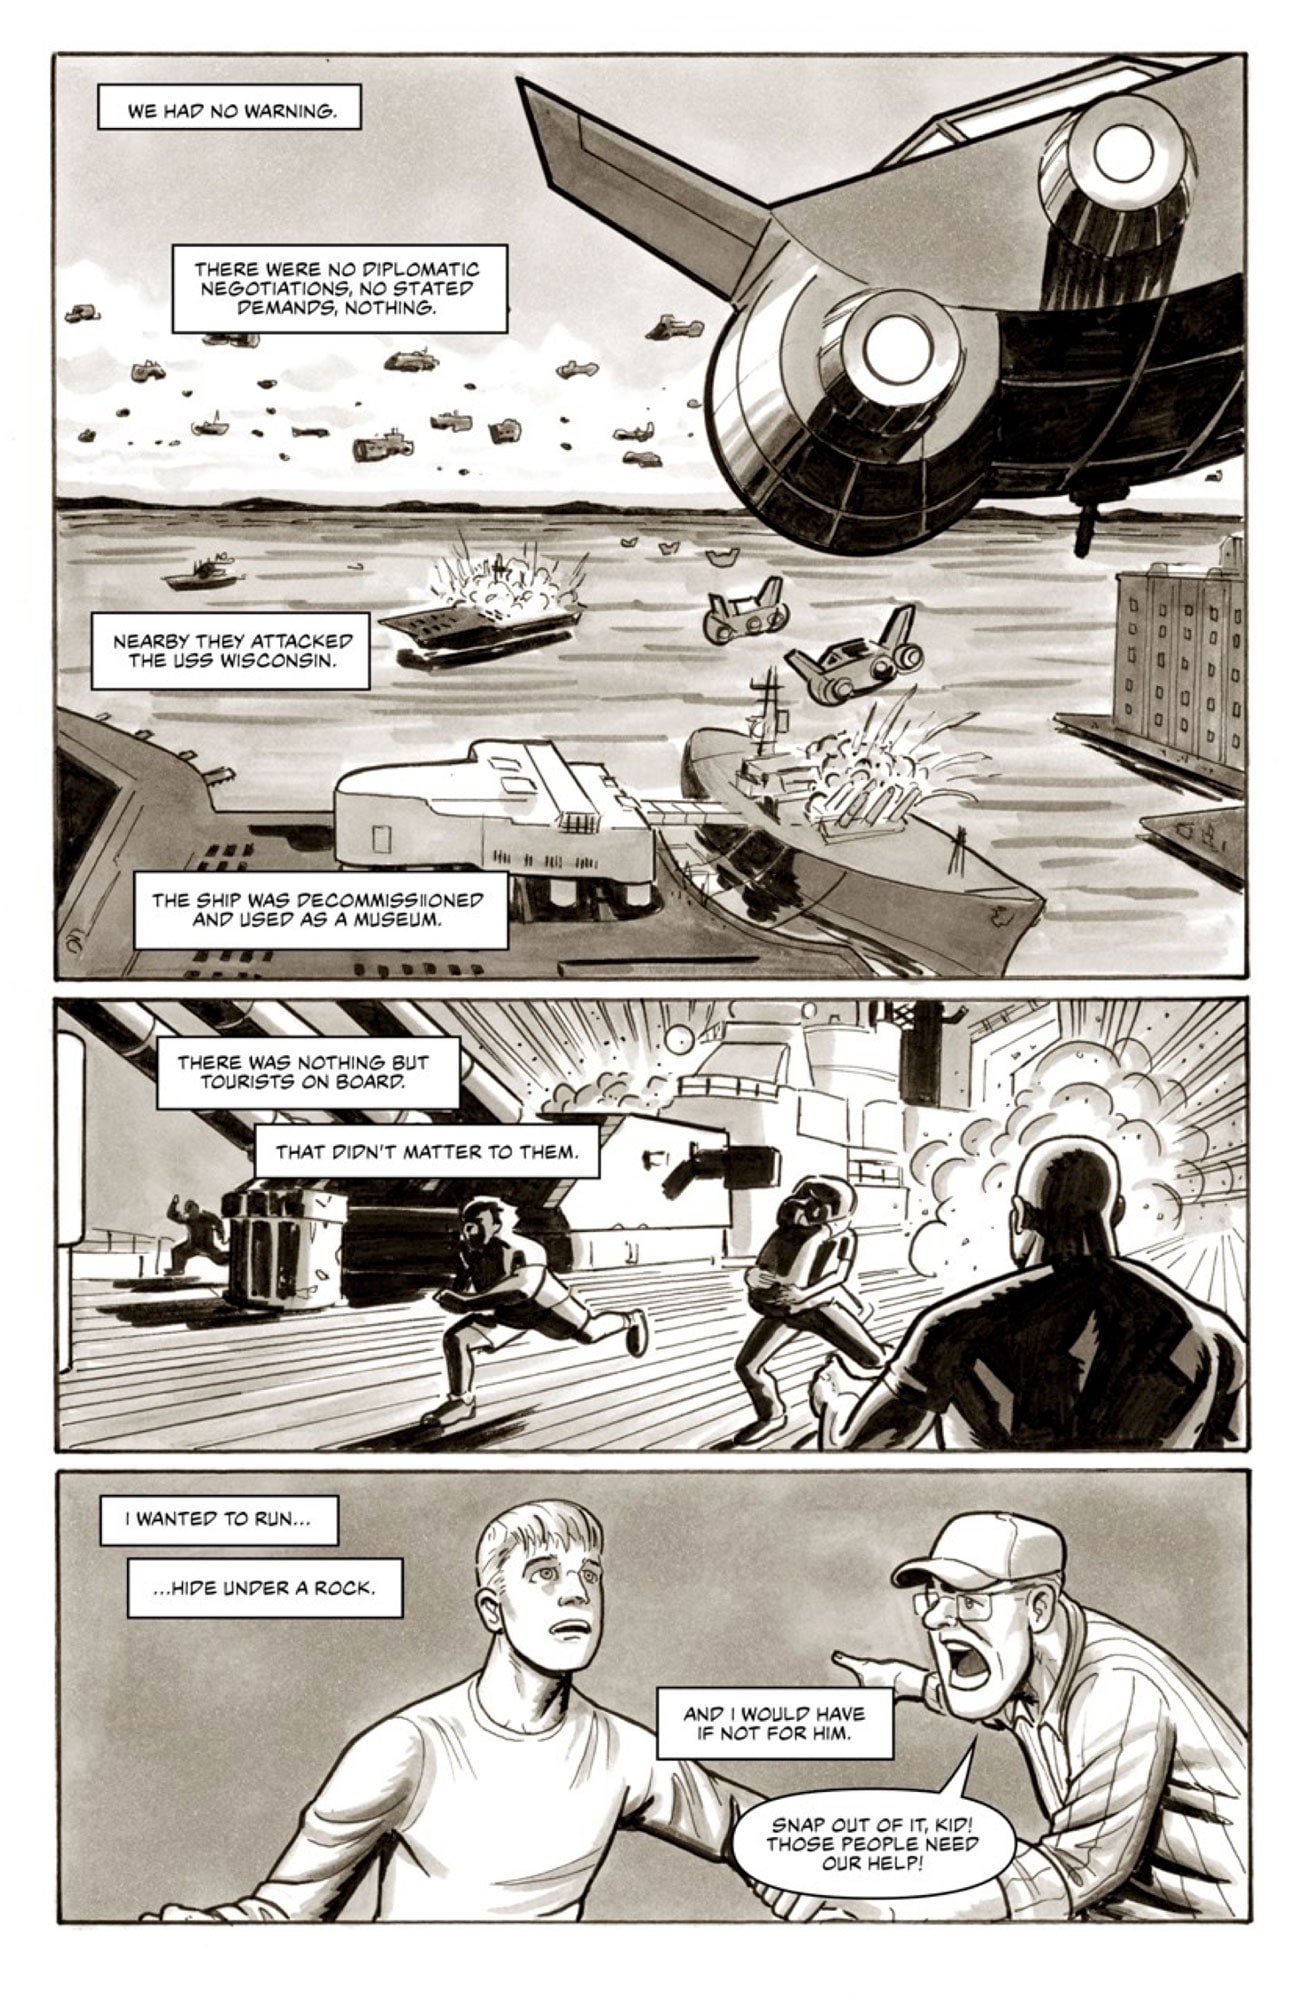 Space Corps #1 page 5